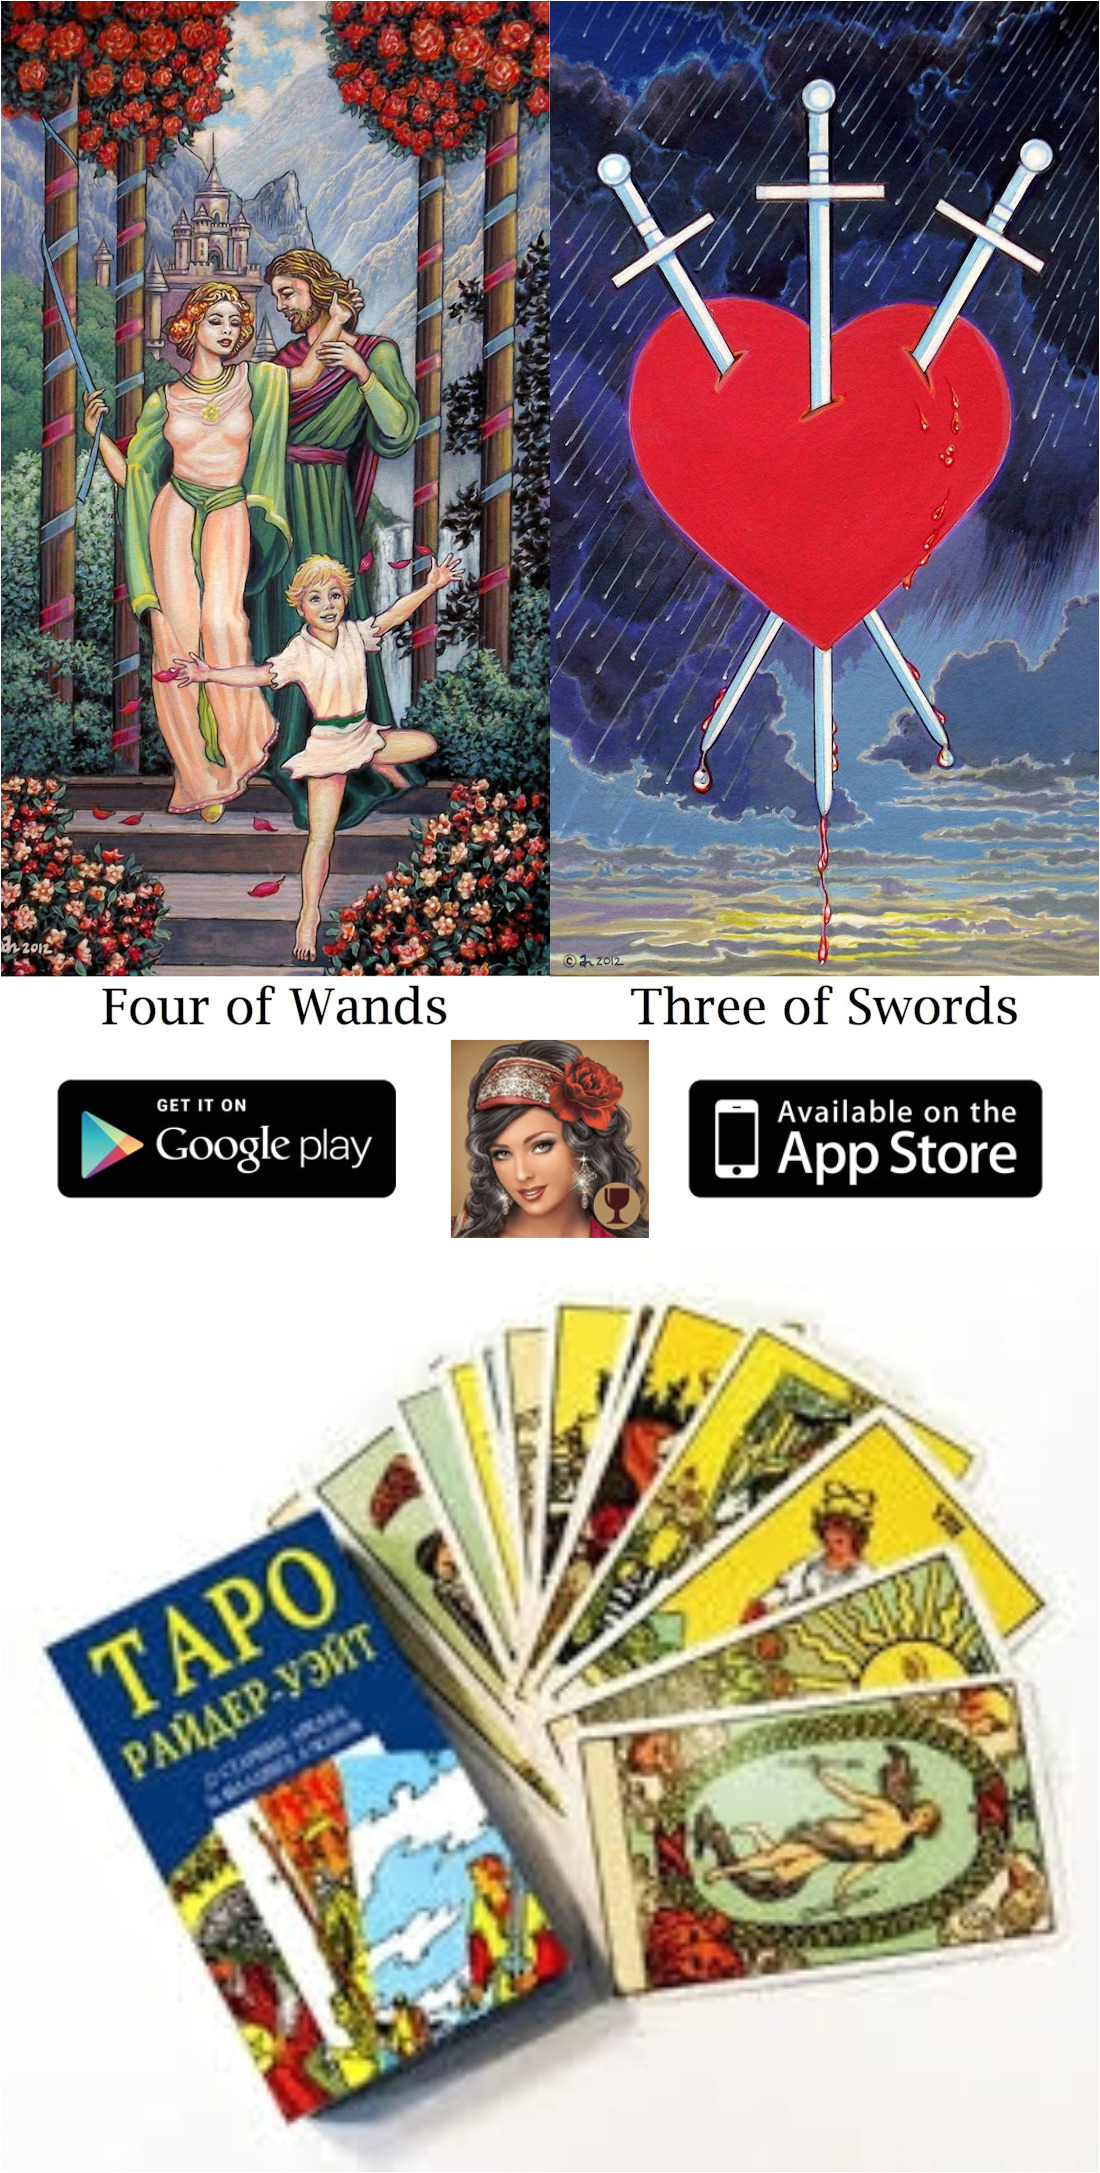 Free Tarot Love Card Reading Get the Free Application On Your Phone or Tablet and Have